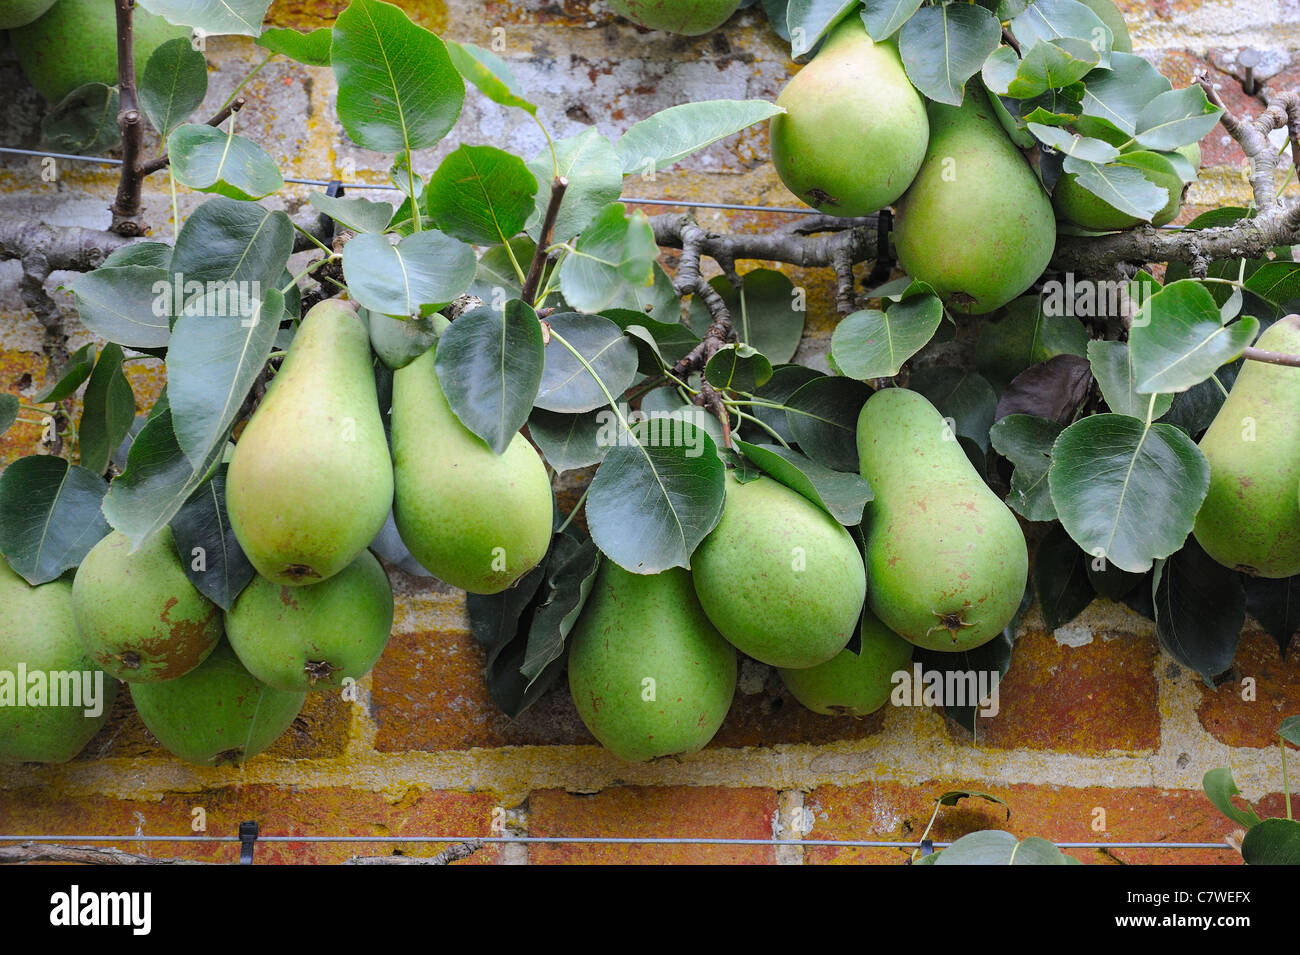 Wall trained pear, 'Vicar of Winkfield', ripe fruit ready for picking, UK, September Stock Photo